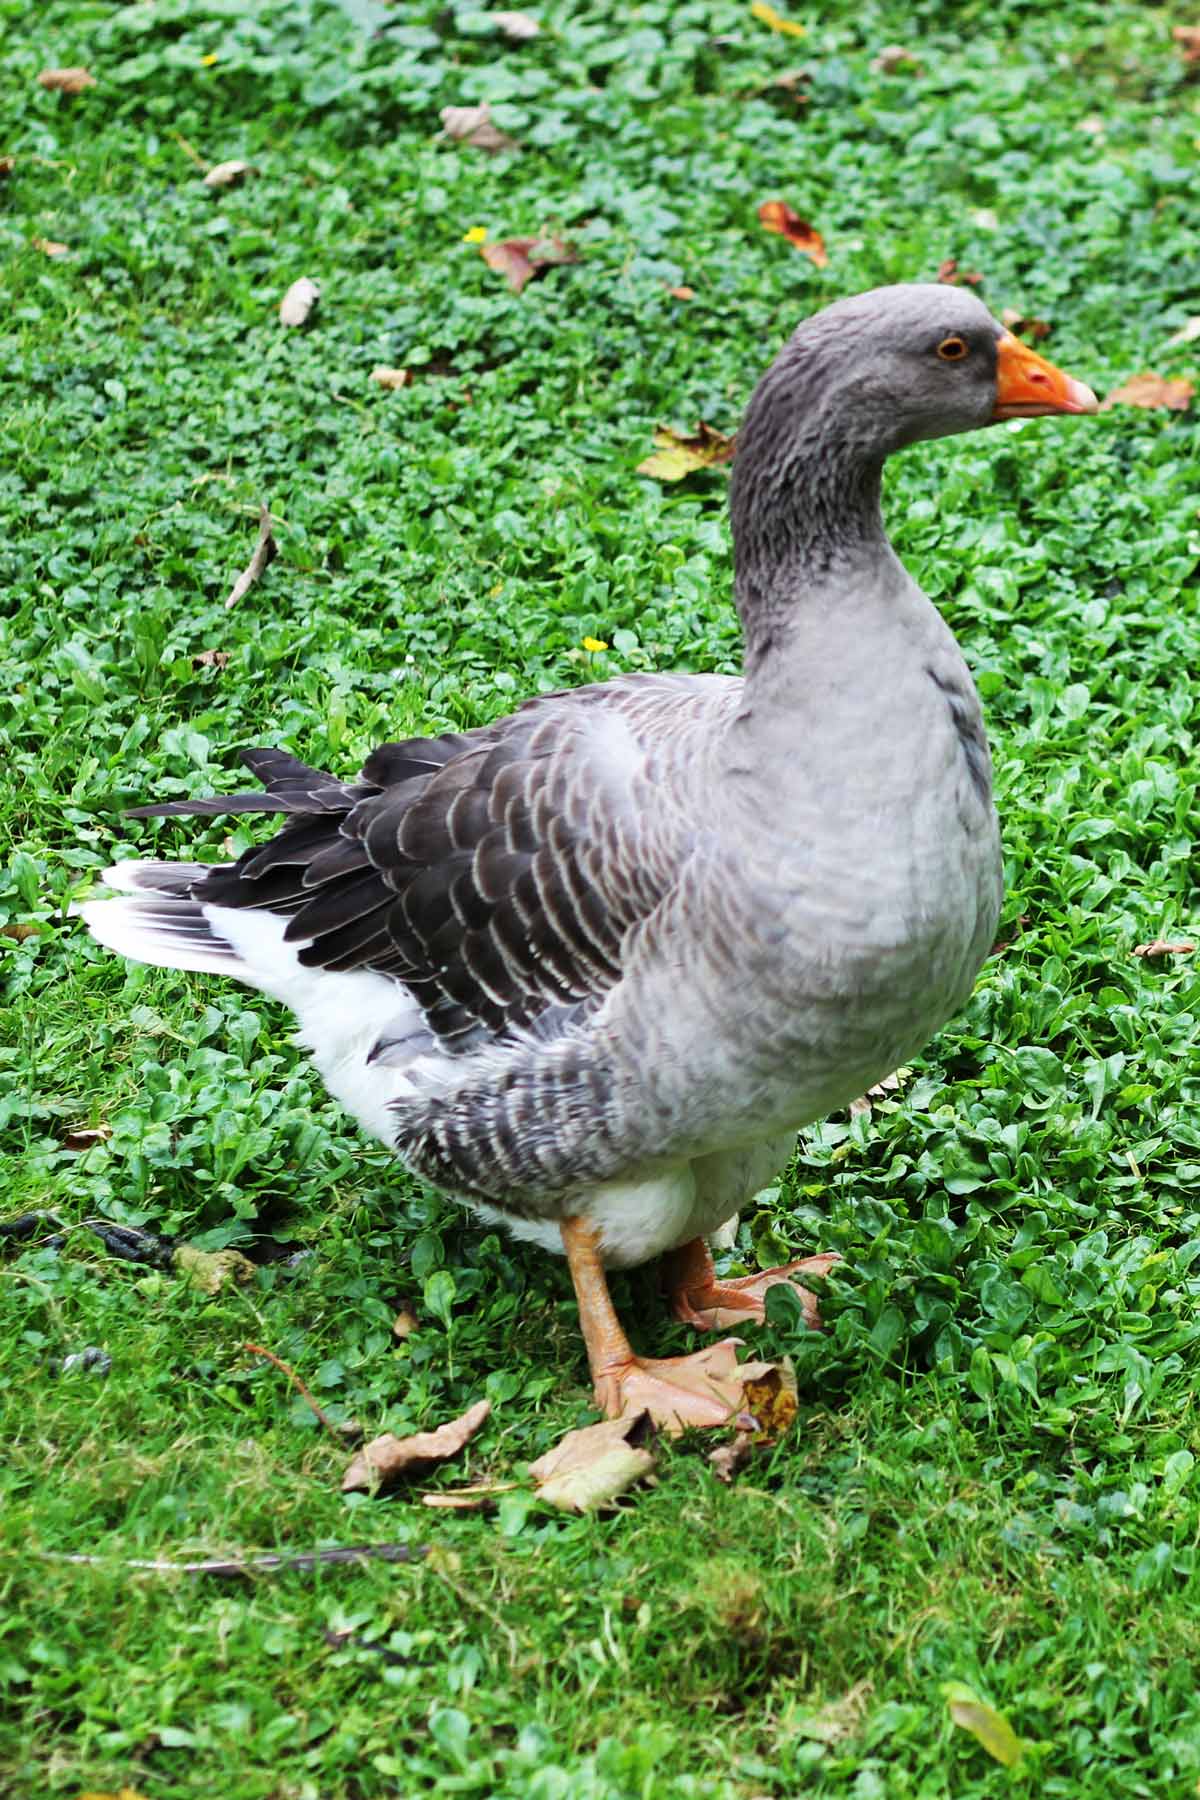 a wild goose on the grass with leaves nearby.